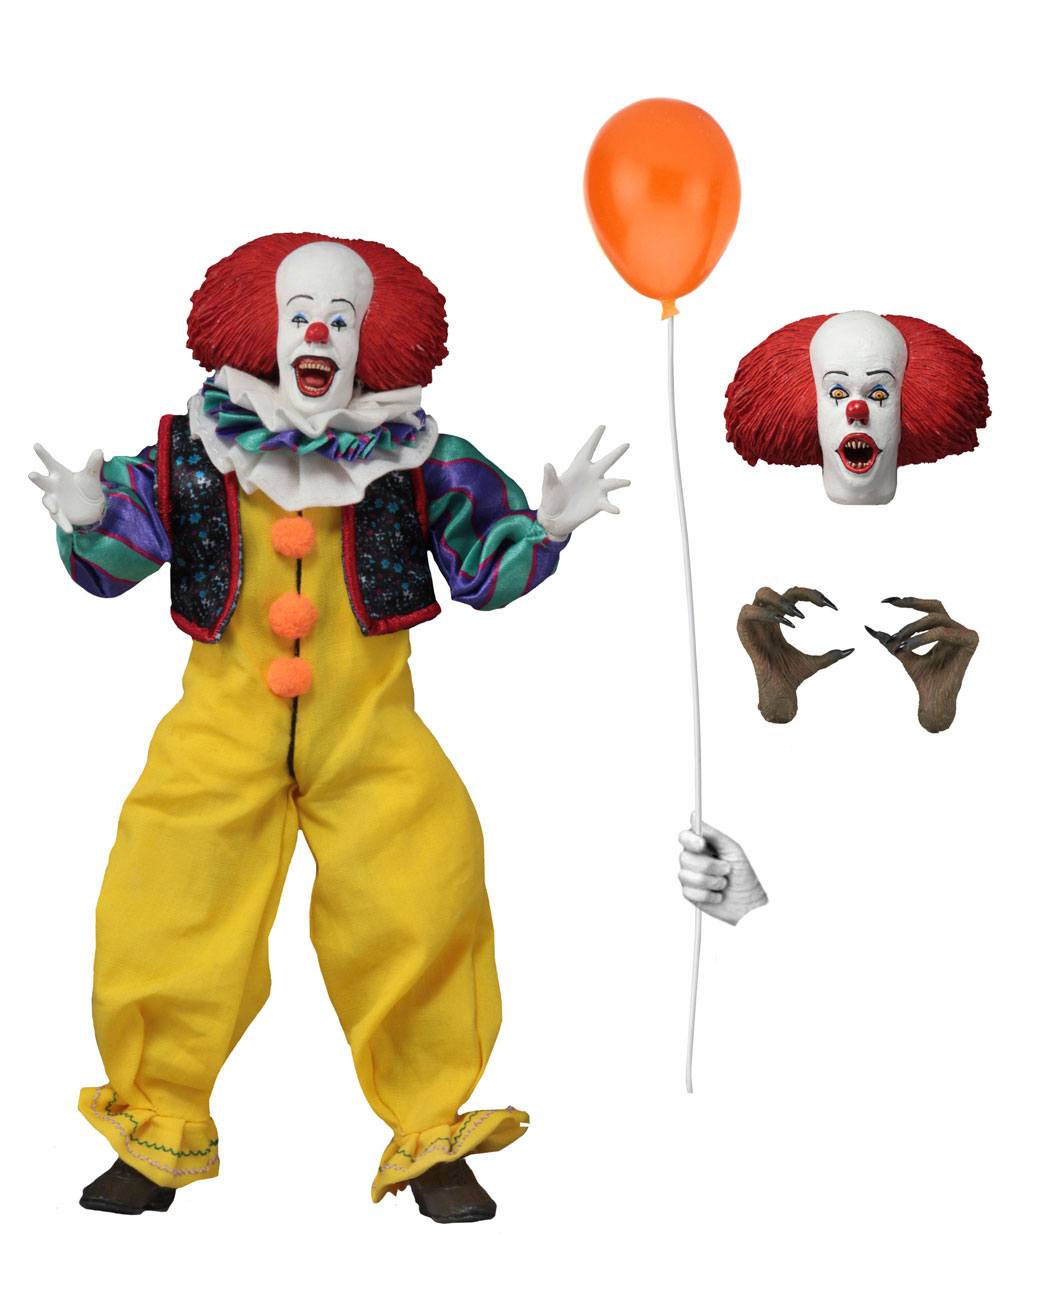 Stephen King's It 1990 Retro Action Figure Pennywise 20 cm